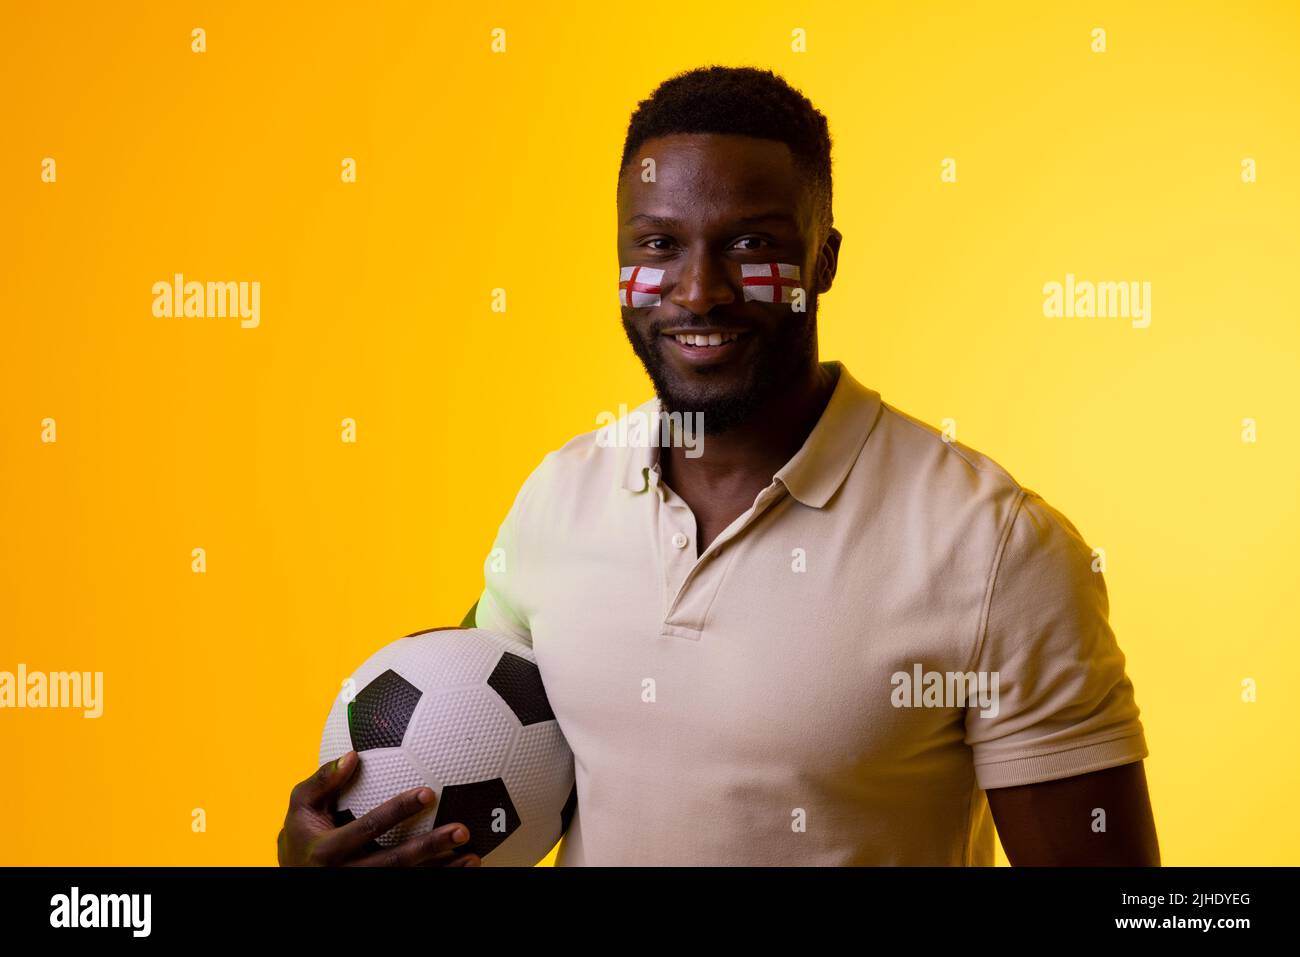 Image of happy african american male soccer fan with flag of england in yellow lighting Stock Photo